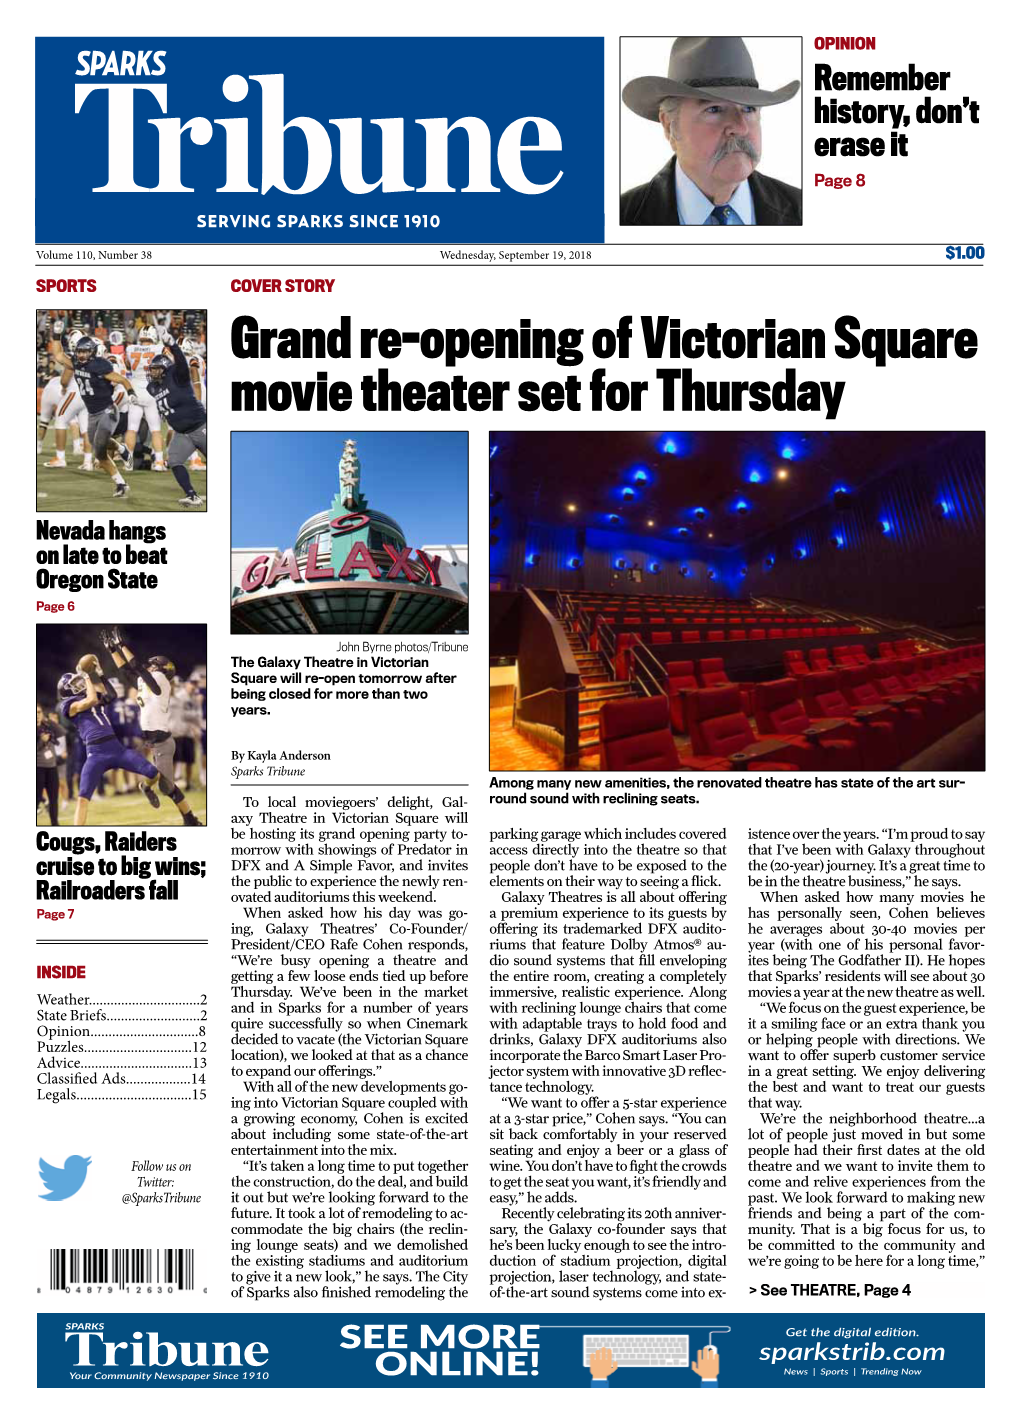 Grand Re-Opening of Victorian Square Movie Theater Set for Thursday